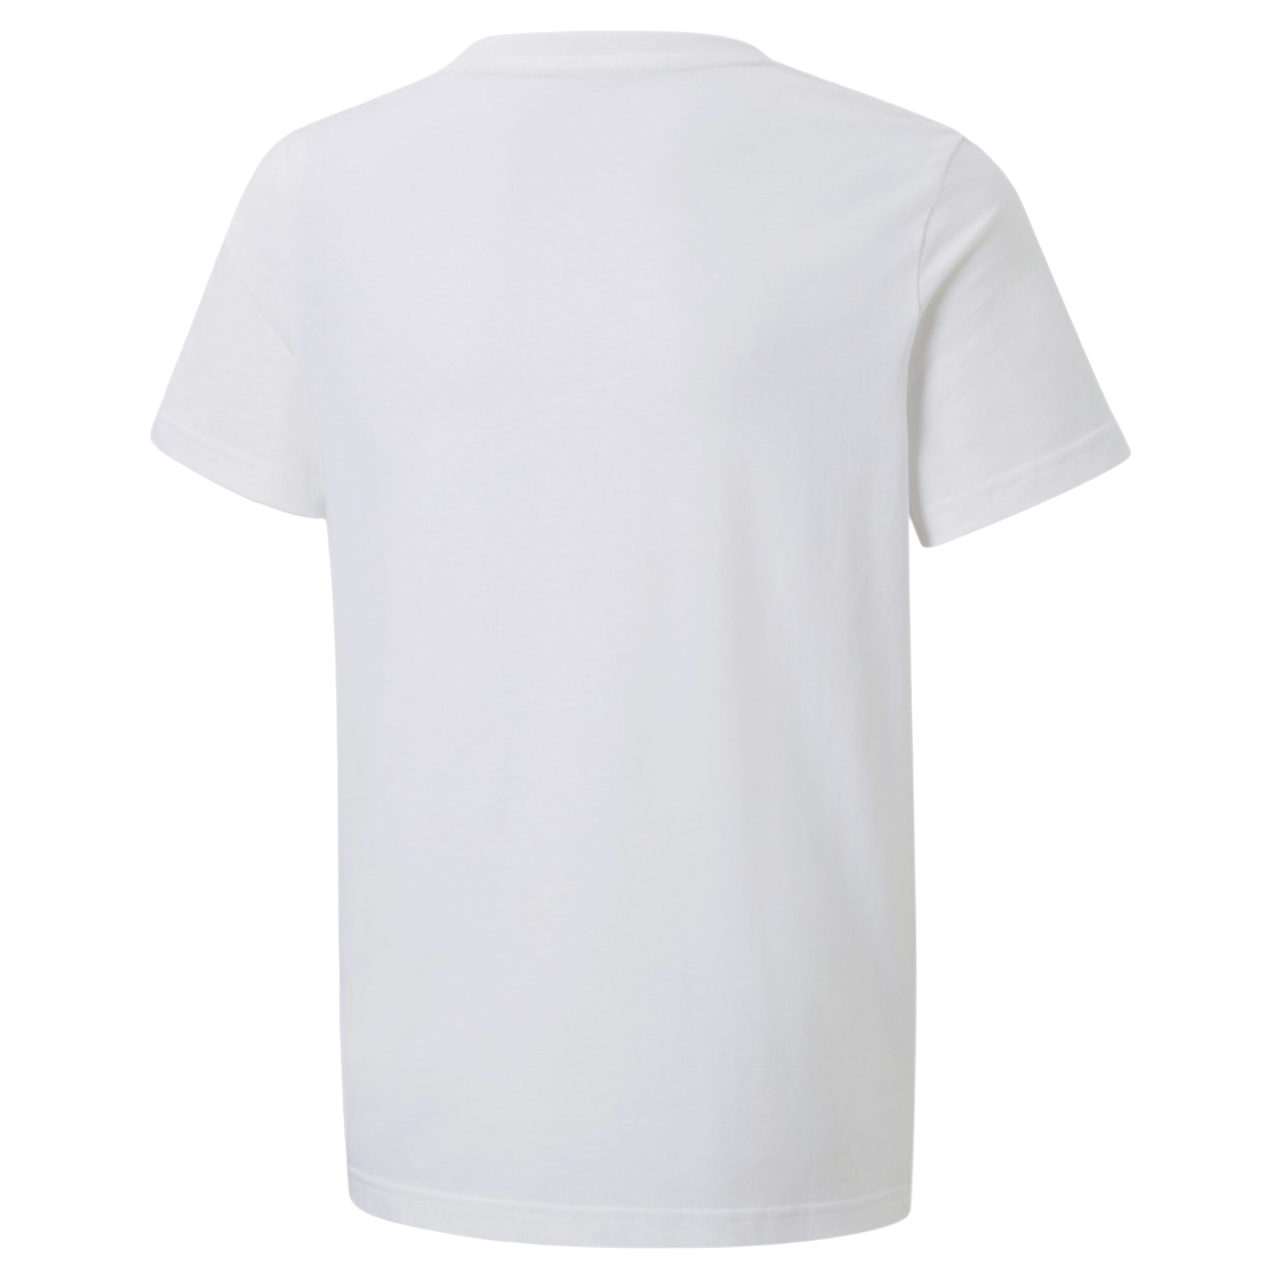 Puma short sleeve t-shirt for boys in Tape cotton 847300-02 white